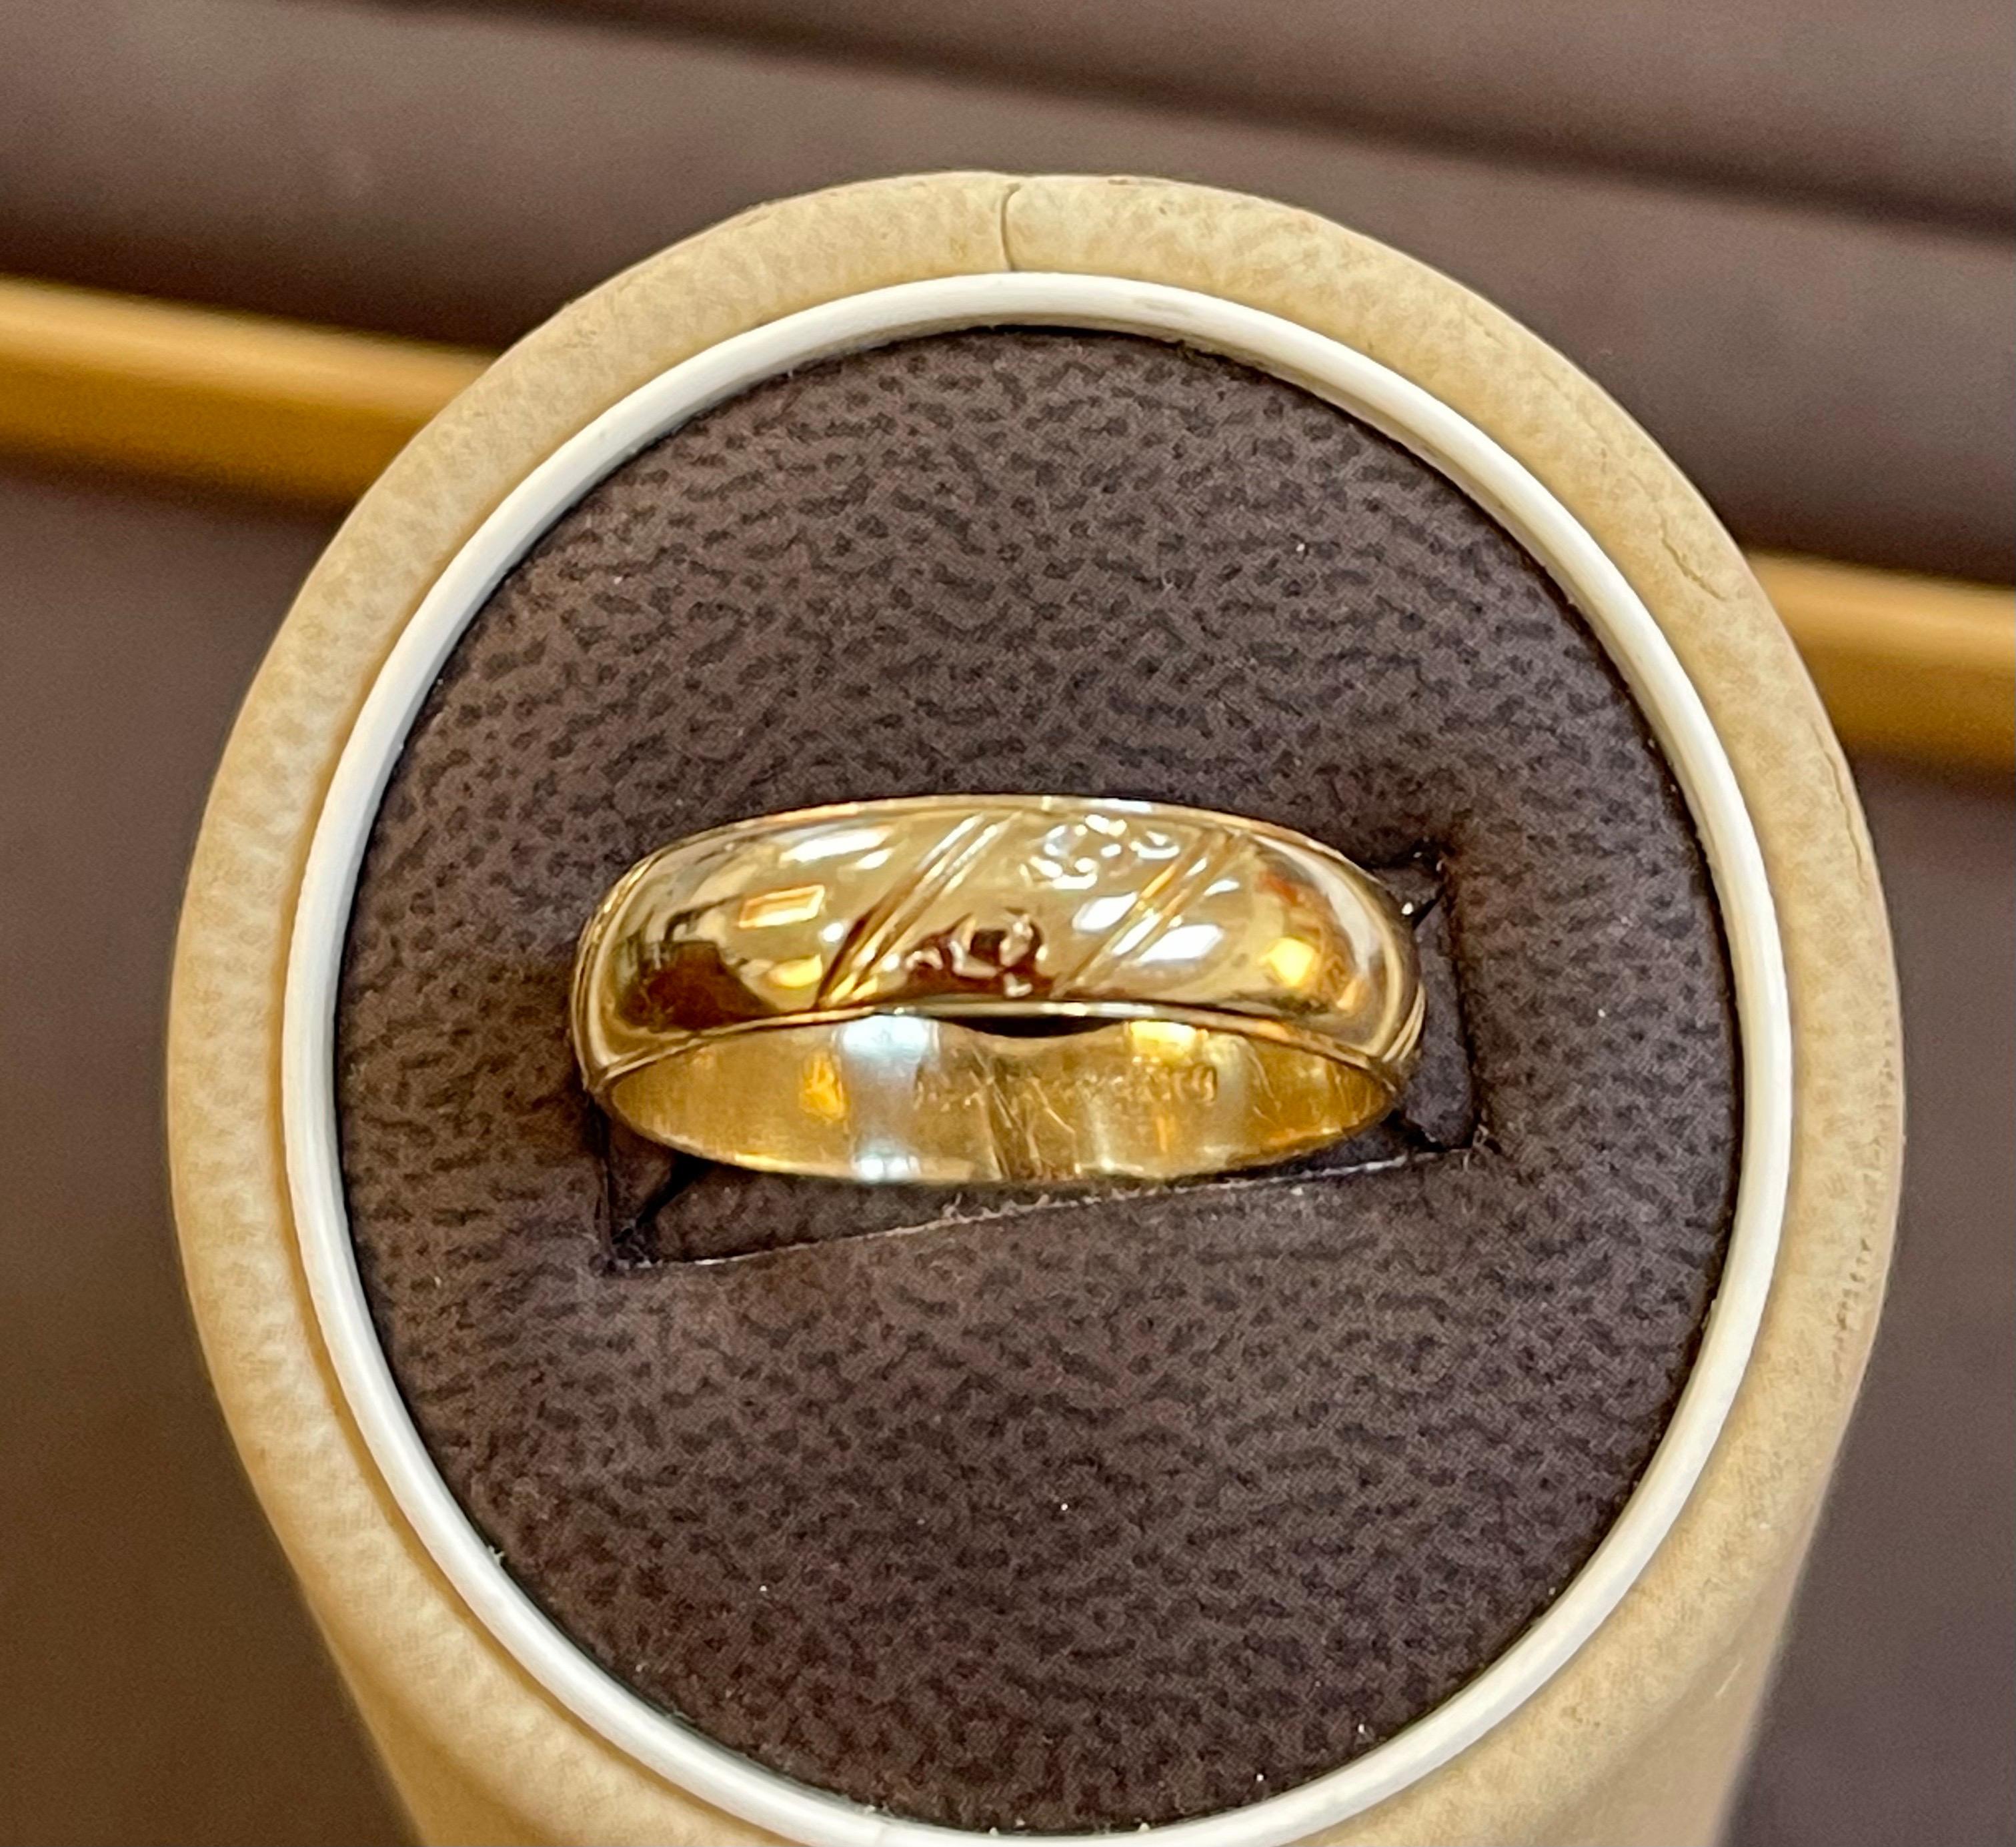 
14 Karat Yellow Gold  Classic Wide Wedding Band Ring Size 9, Unisex
This timeless style adds a Light classic Design all over  band.
Quality craftsmanship makes this long lasting band a great value. rounded inside edge for increased comfort.
High